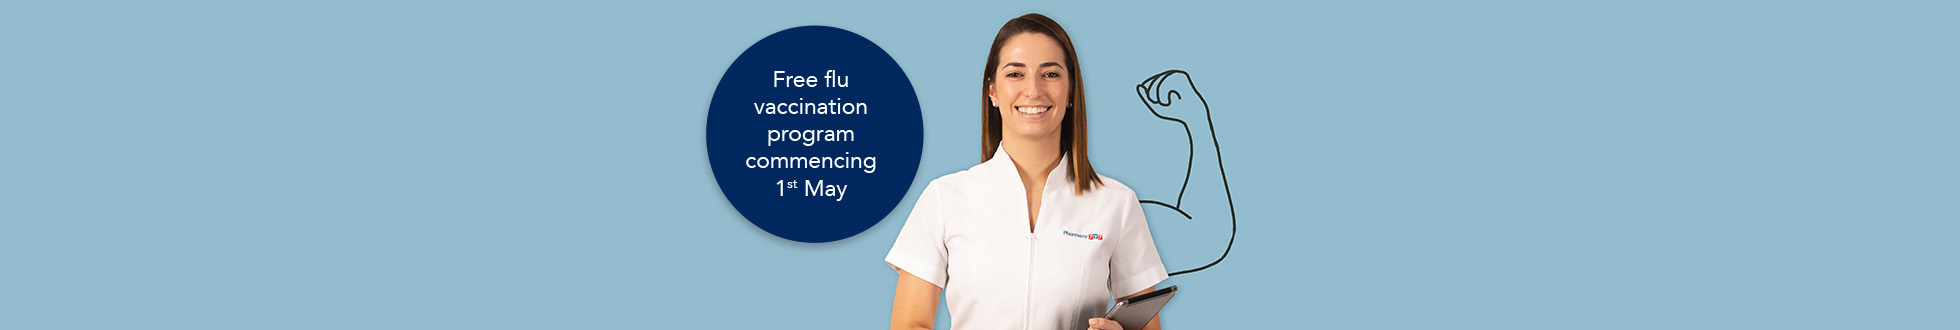 Free Flu vaccination program commencing 1st May